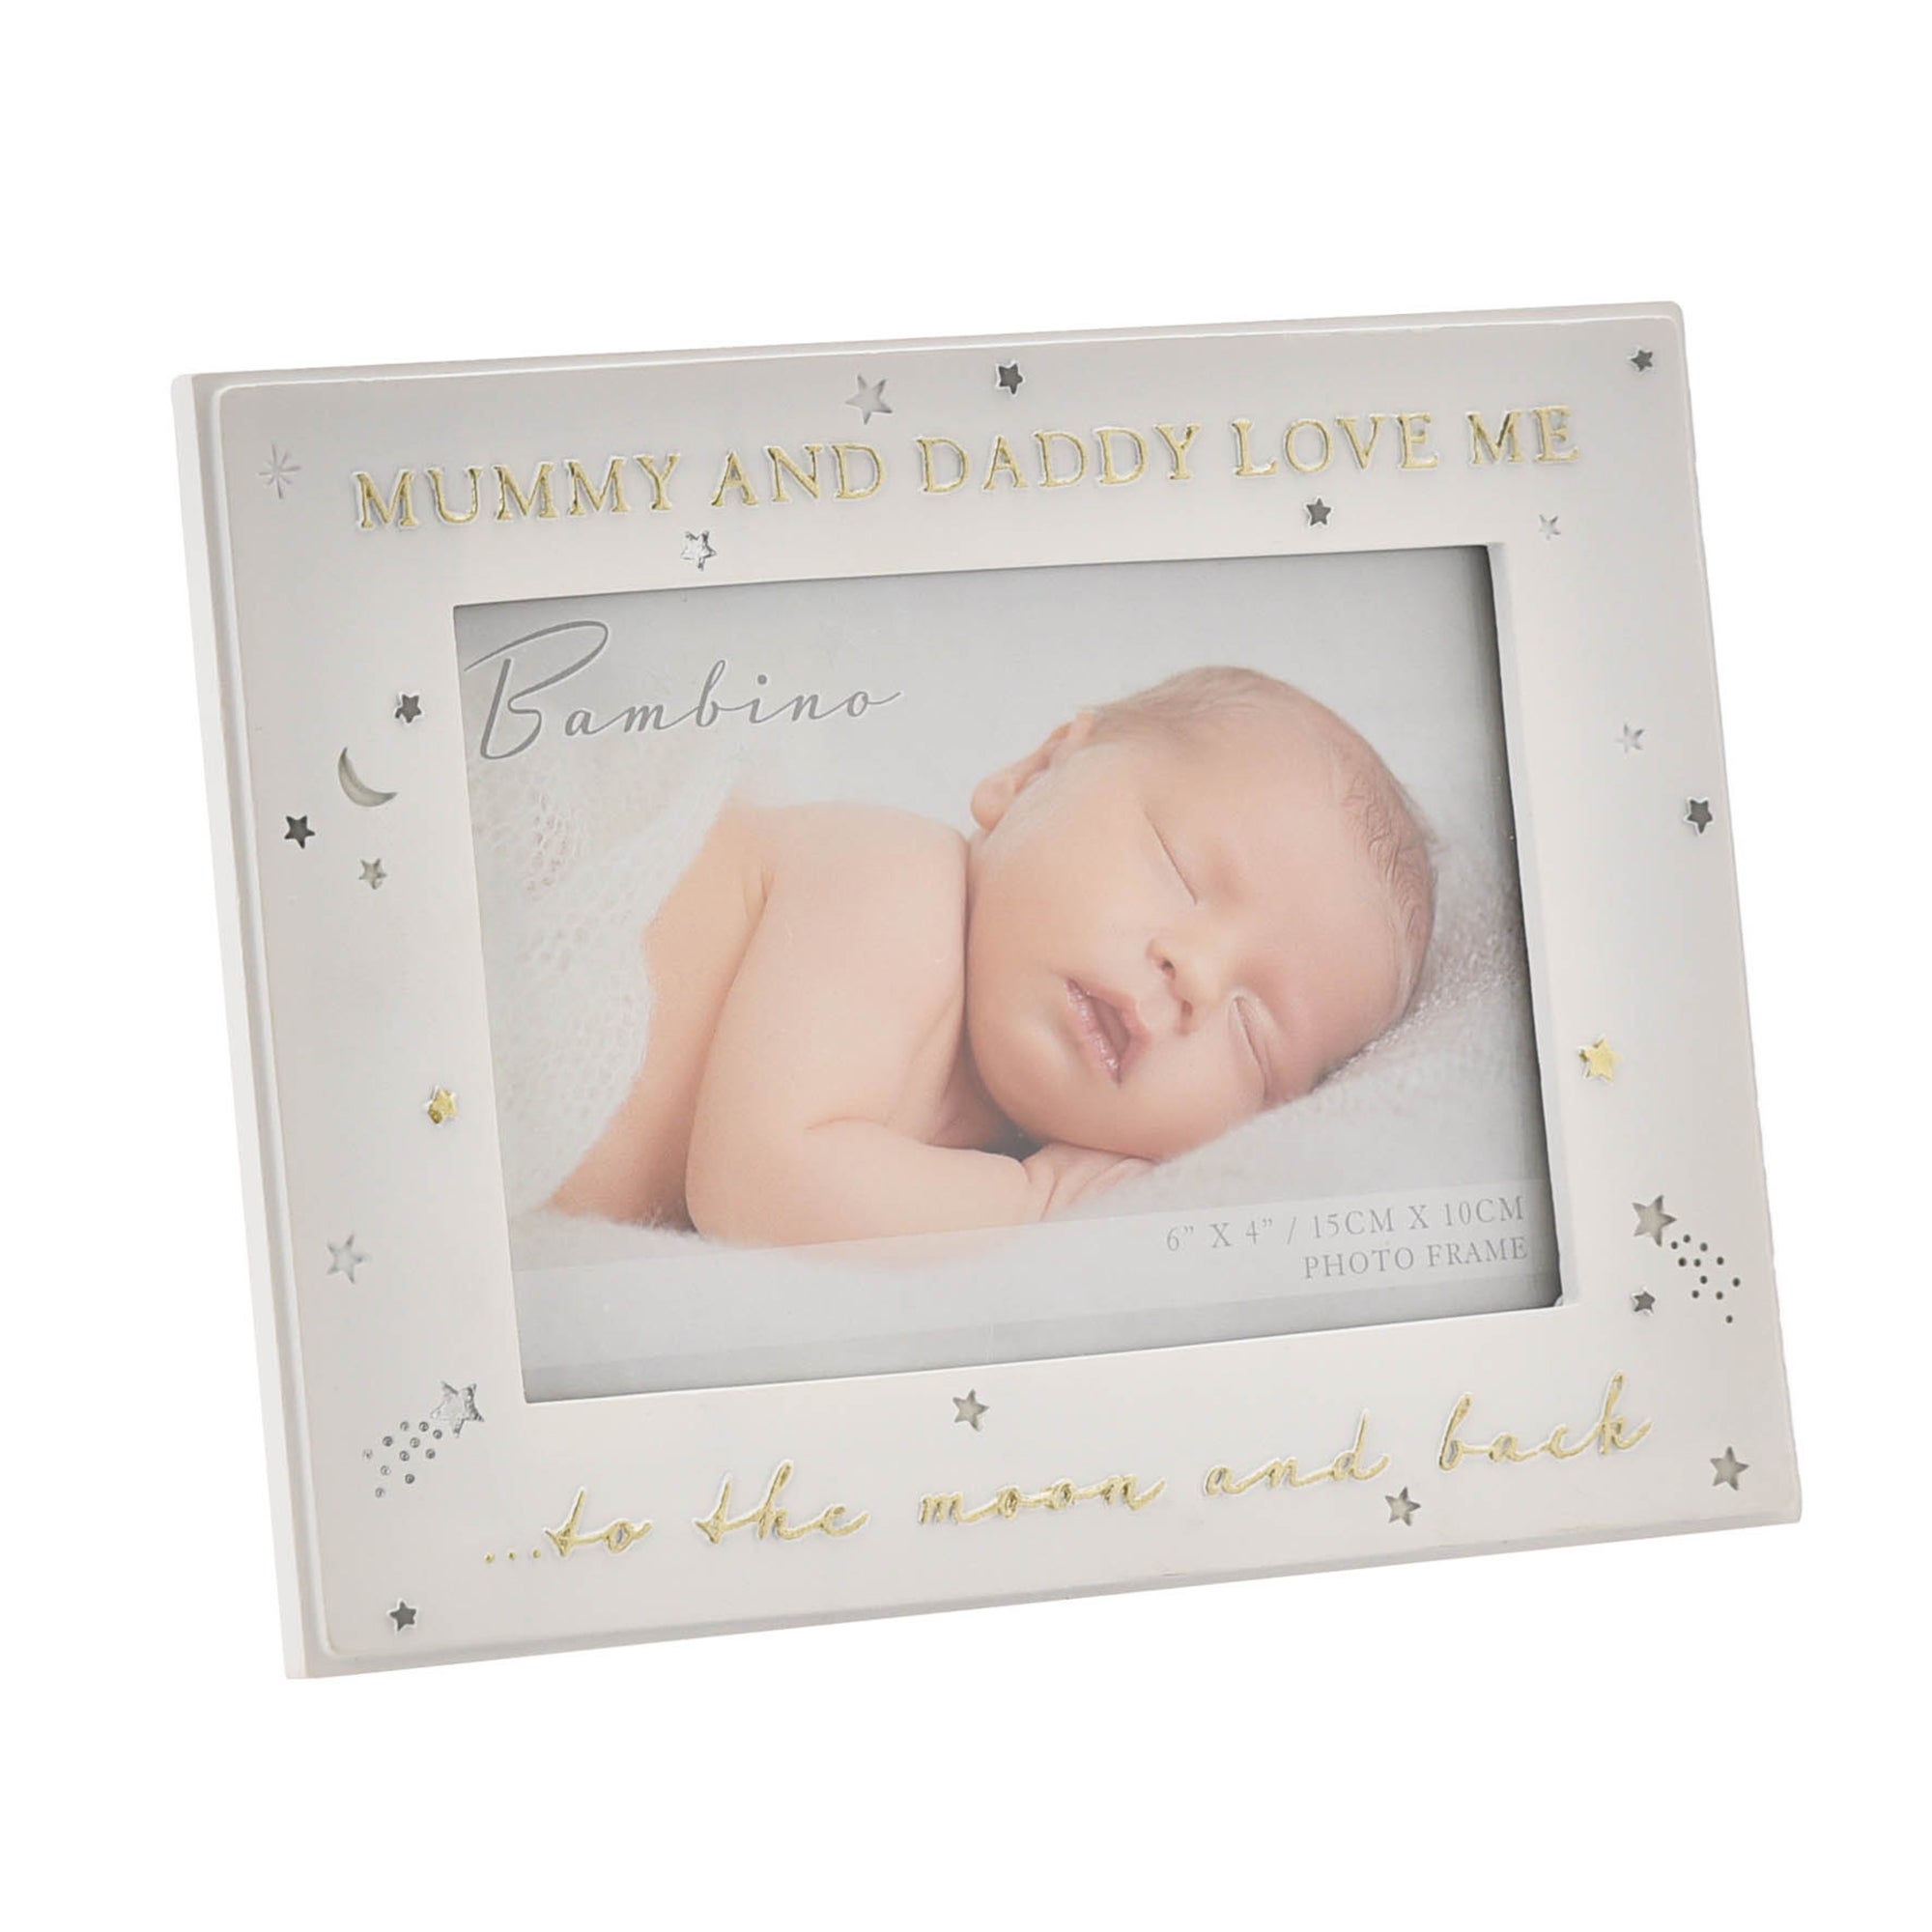 Bambino Mummy & Daddy Love Me To The Moon & Back Photo Frame